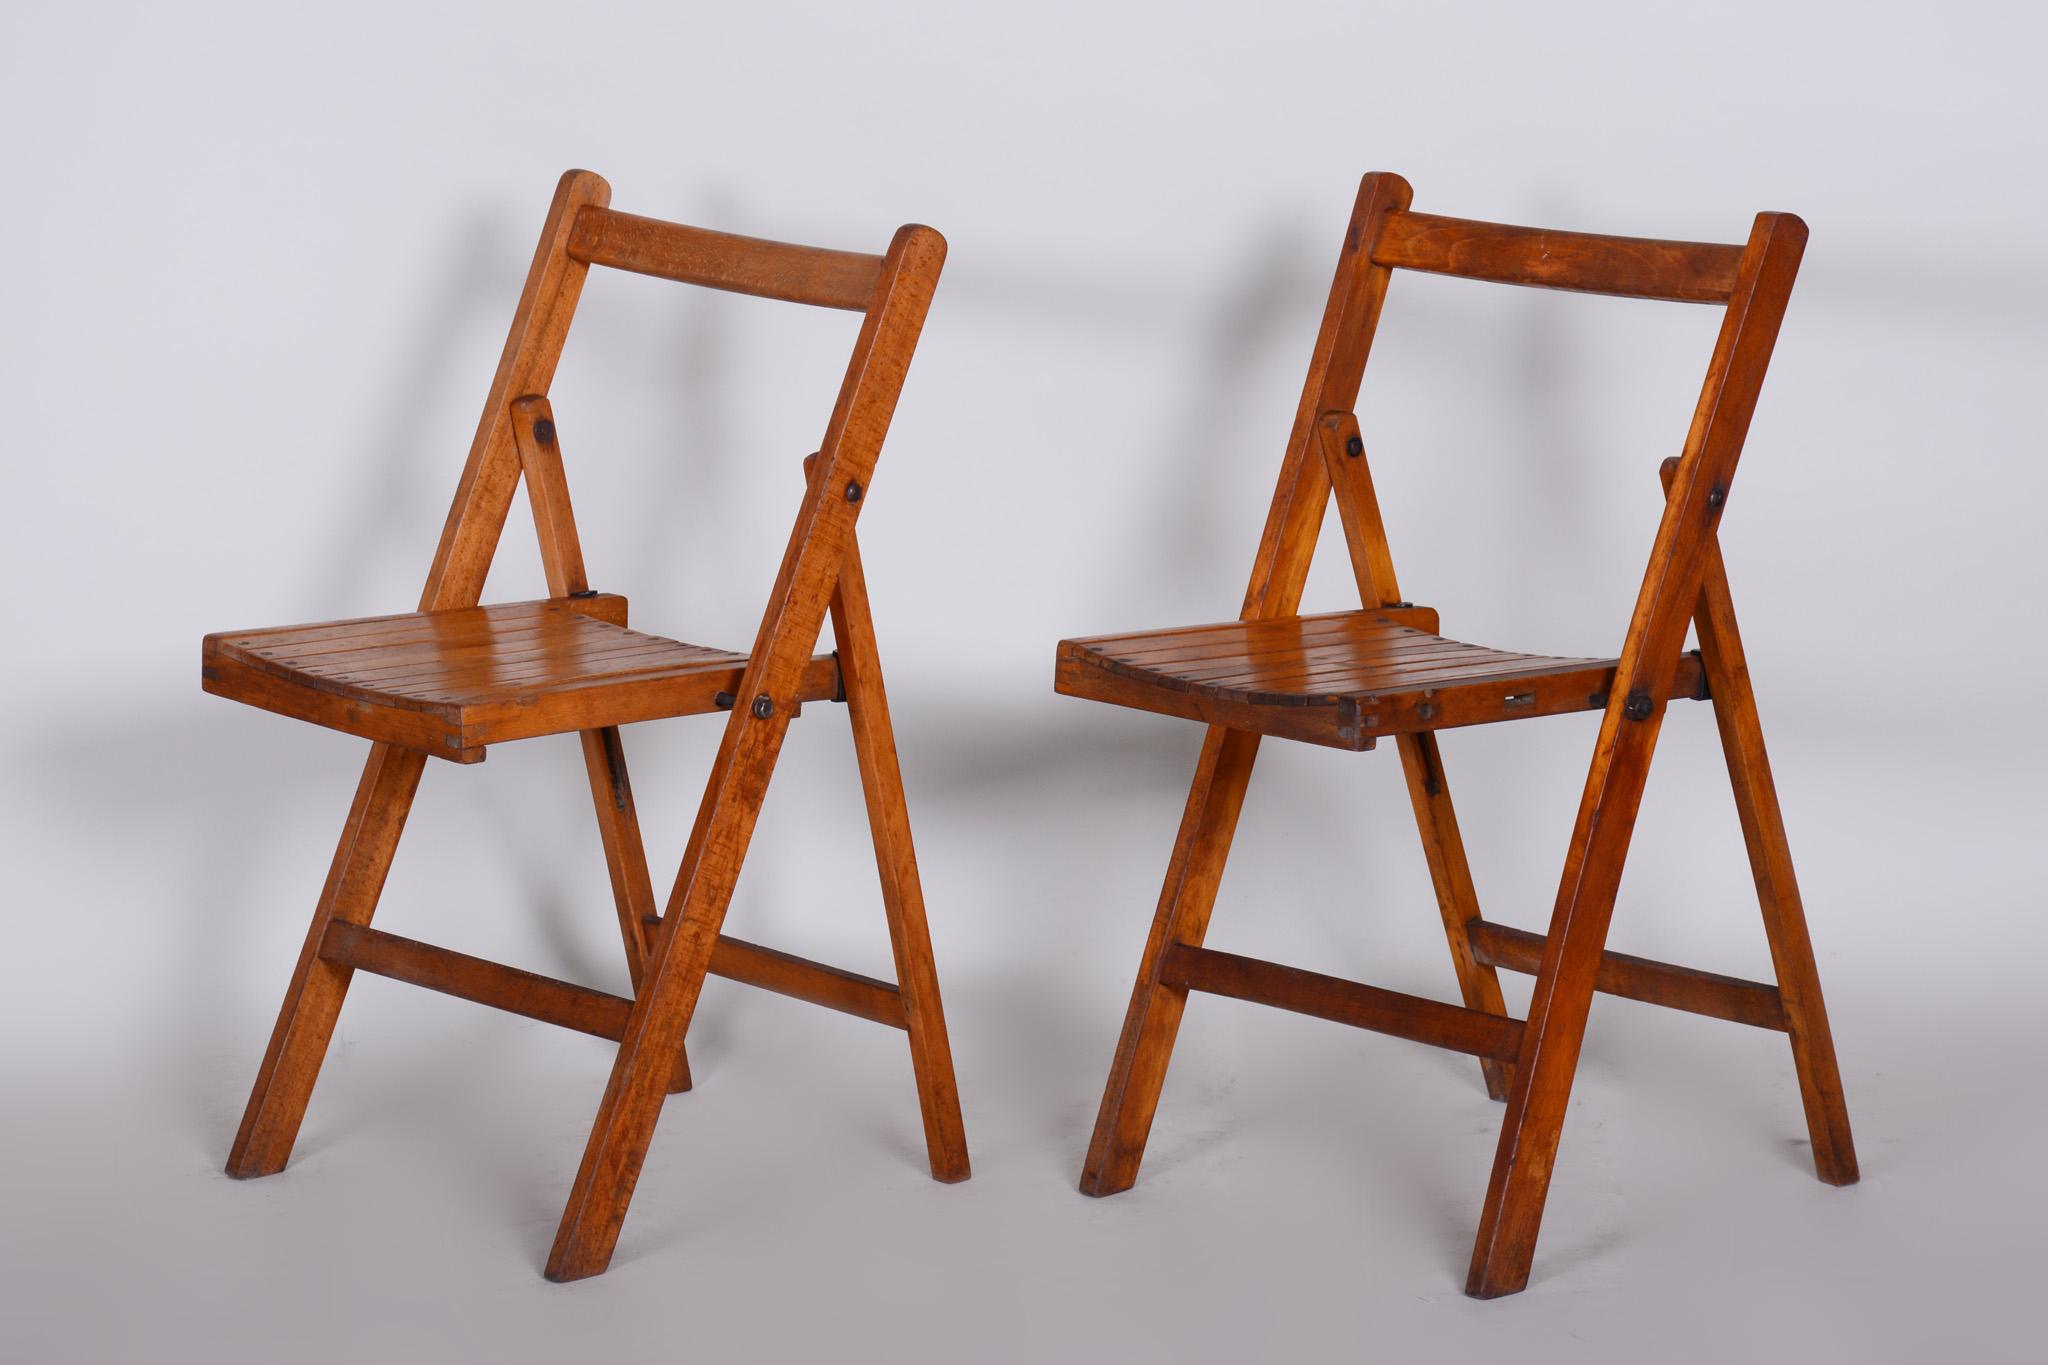 Mid-Century Modern Beech Midcentury Chairs, 3 Pieces, 1950s, Well Preserved Condition For Sale